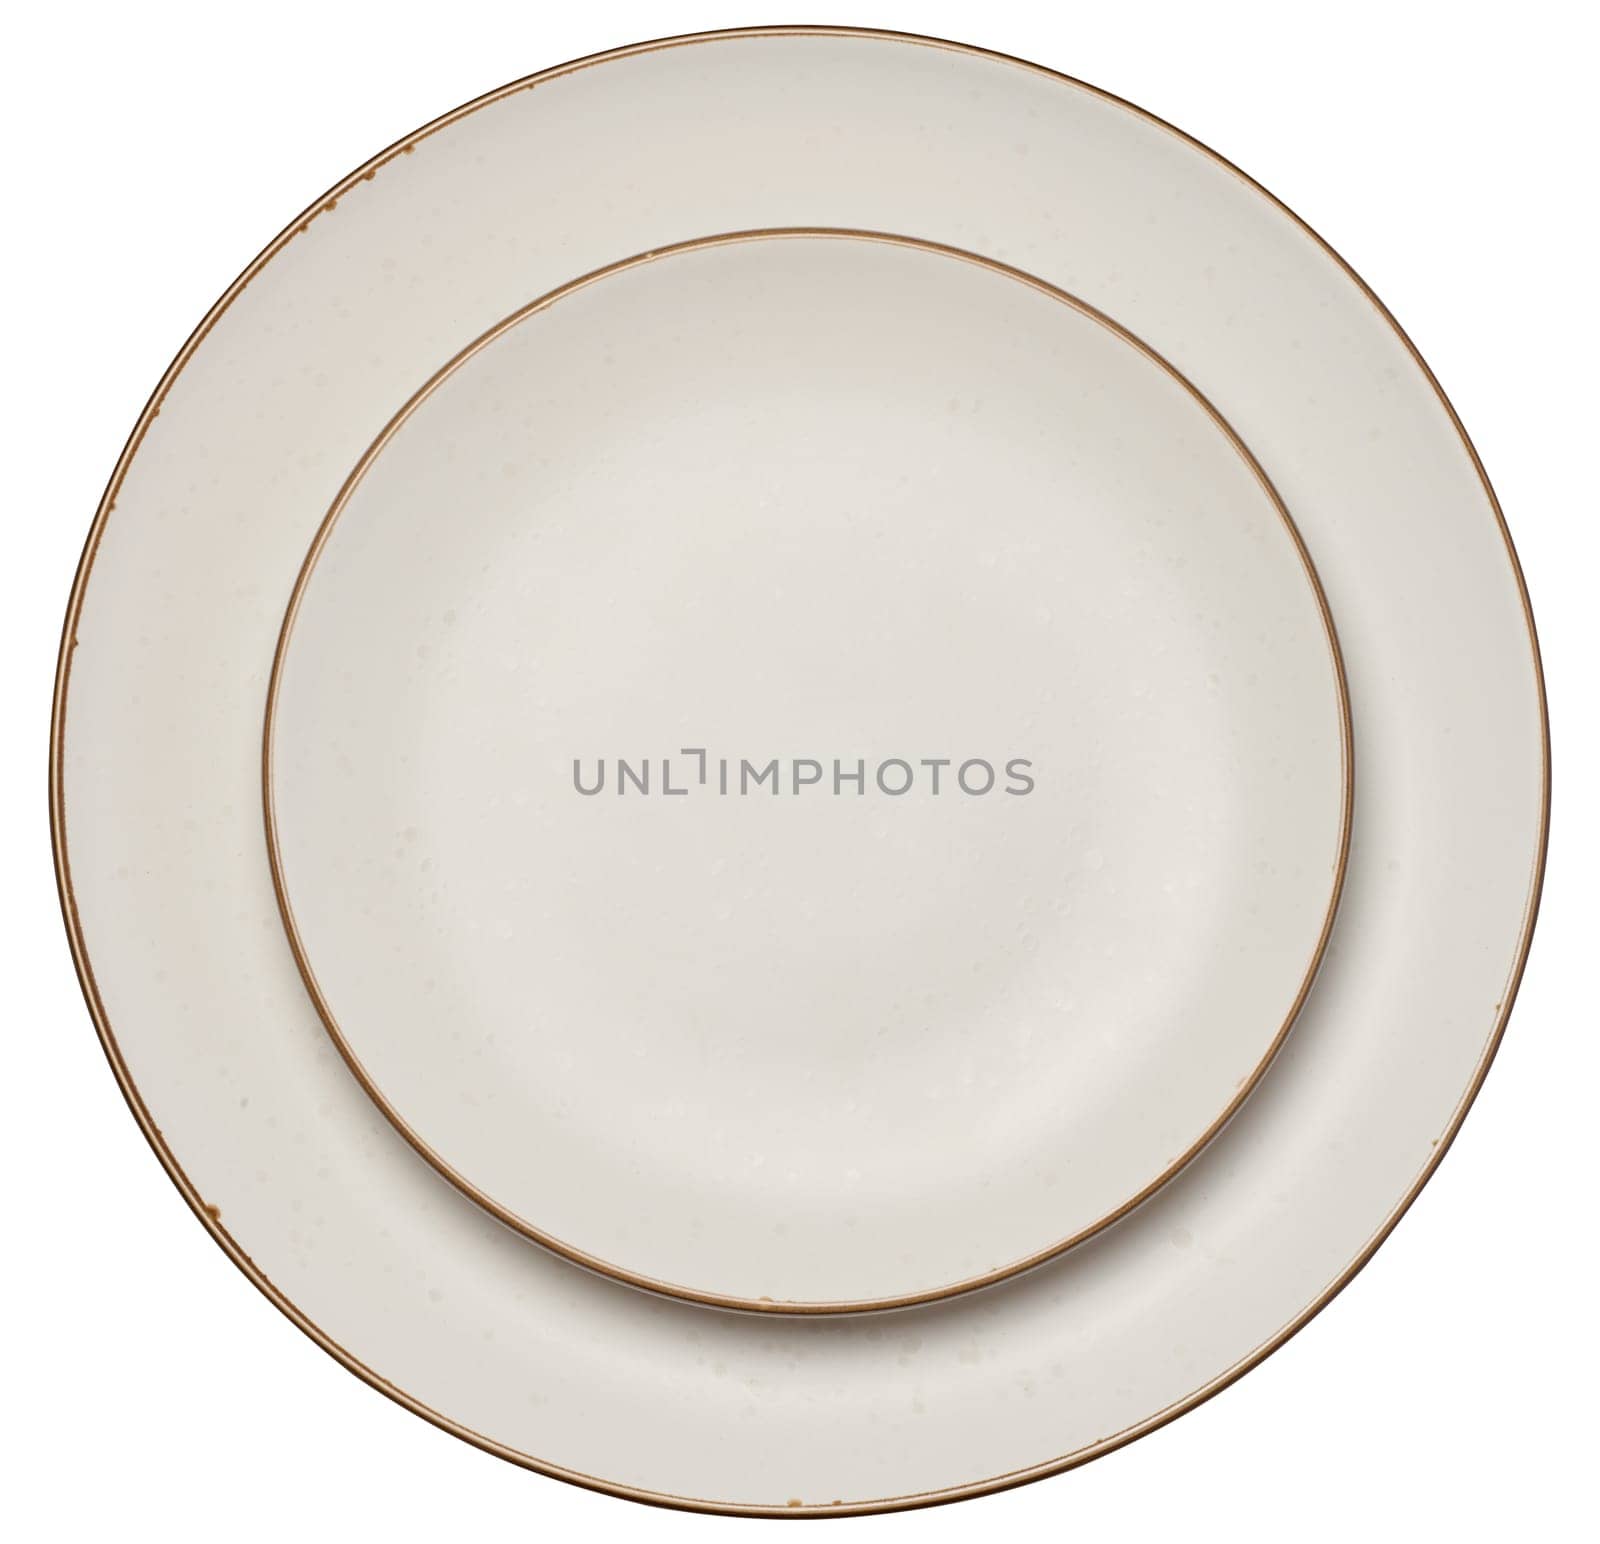 Two empty white ceramic plate with brown edge on isolated background, top view. Dishes on top of each other